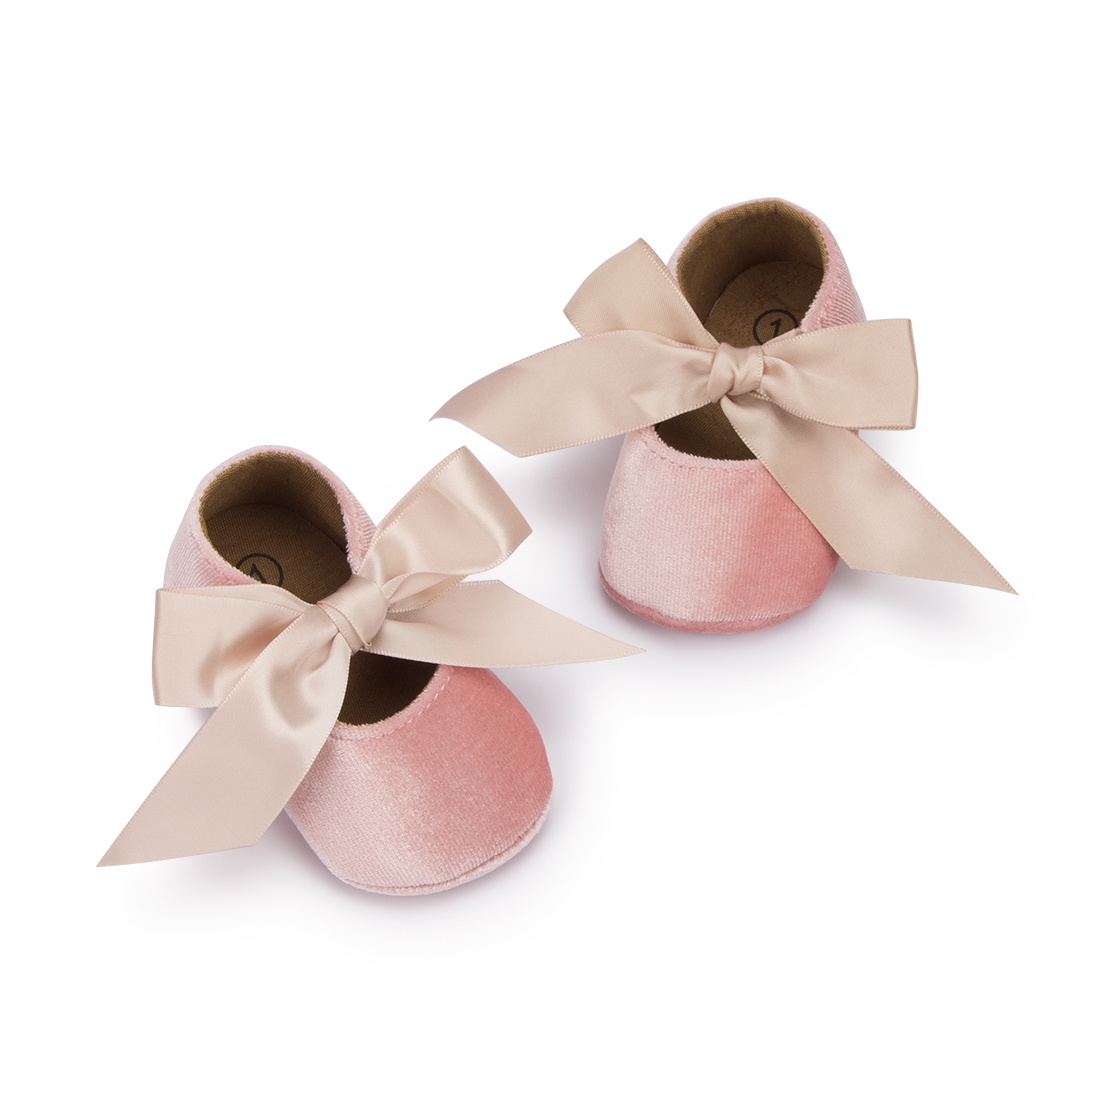 Non-slip Princess shoes for infants and toddlers